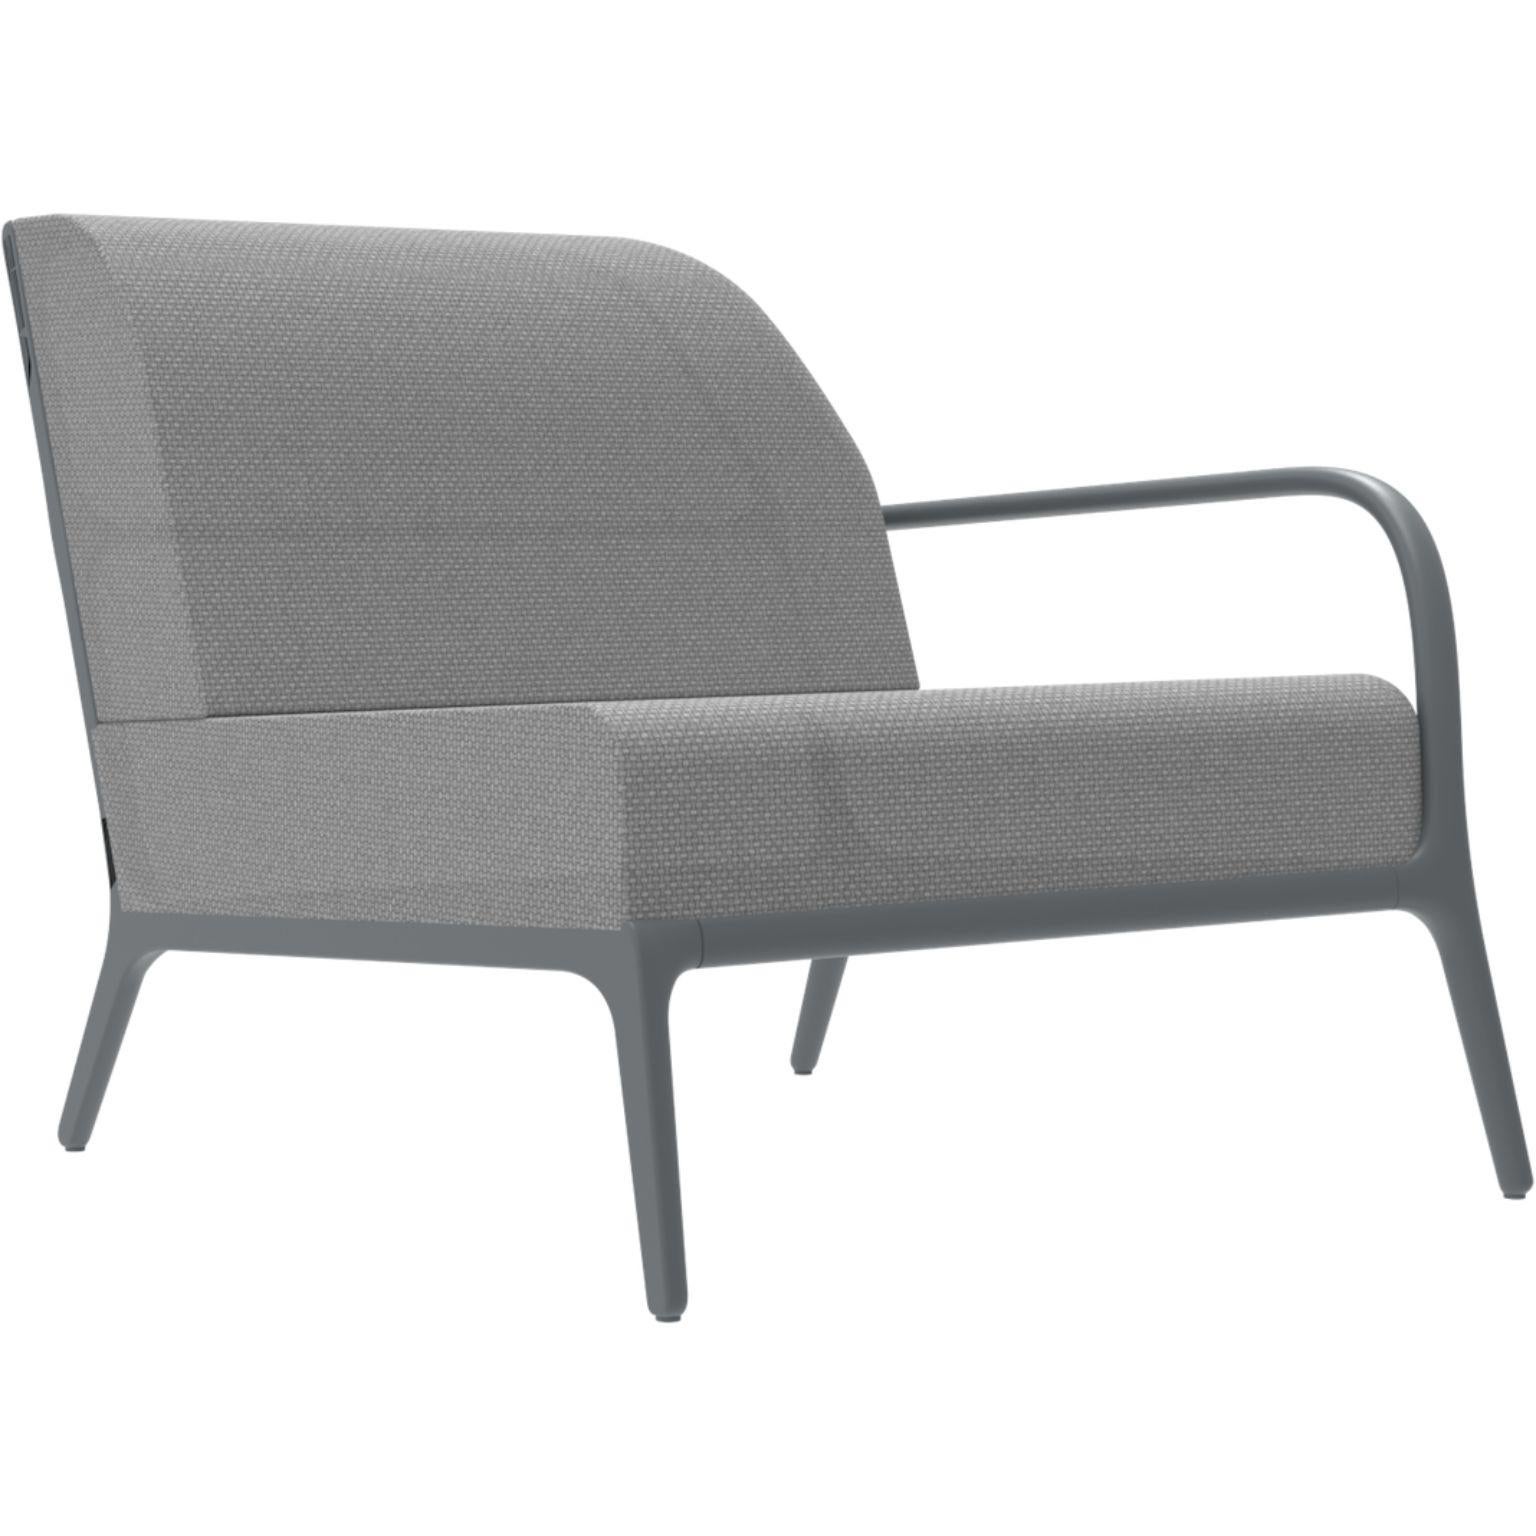 Xaloc Left 90 Grey Modular sofa by MOWEE
Dimensions: D100 x W90 x H81 cm (Seat Height 42 cm)
Material: Aluminium, Textile
Weight: 25 kg
Also Available in different colors and finishes. 

 Xaloc synthesizes the lines of interior furniture to